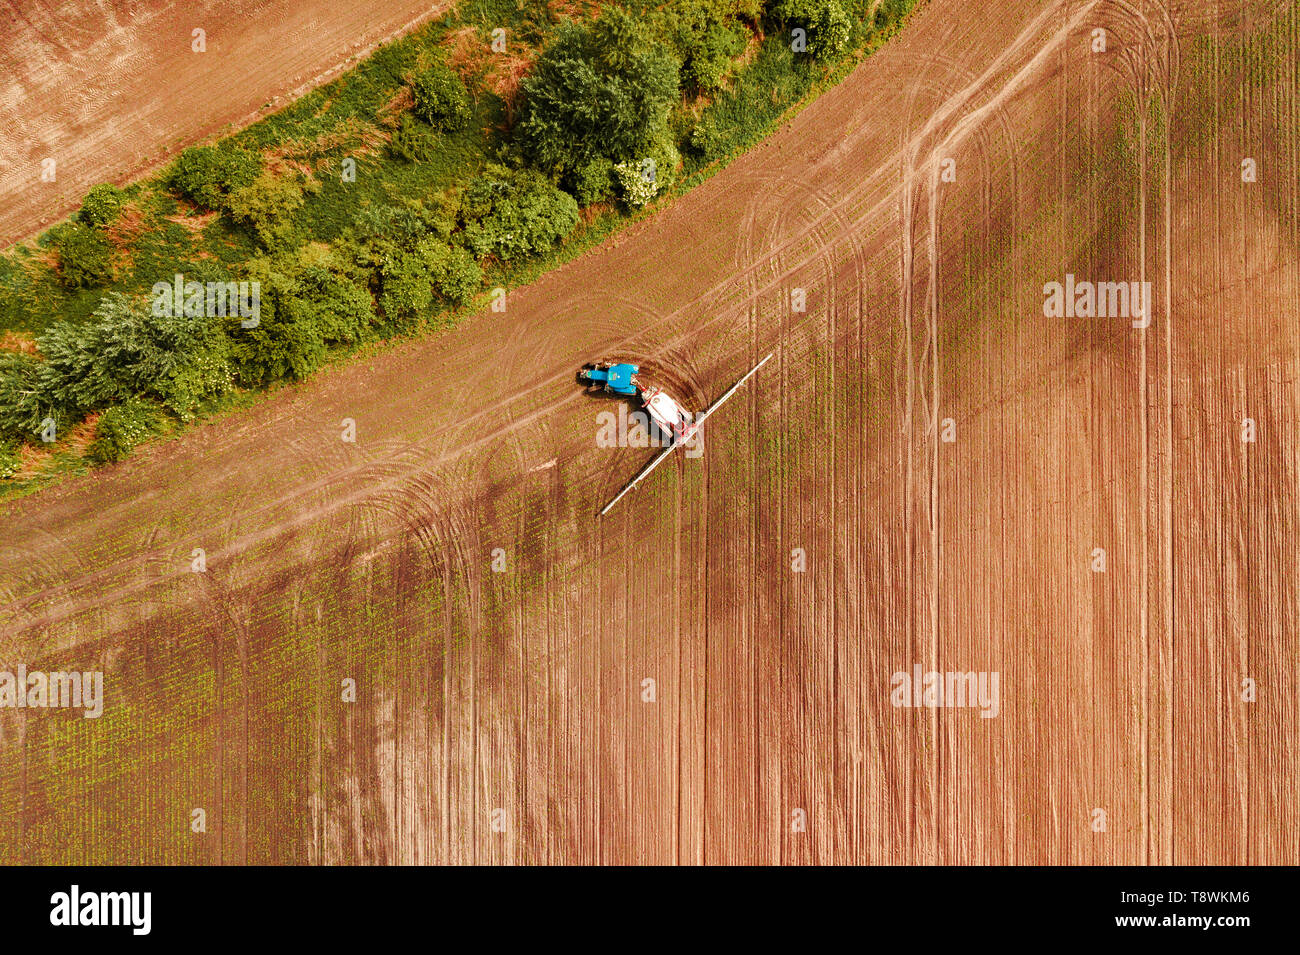 Tractor spraying crops in field, aerial view from drone pov Stock Photo